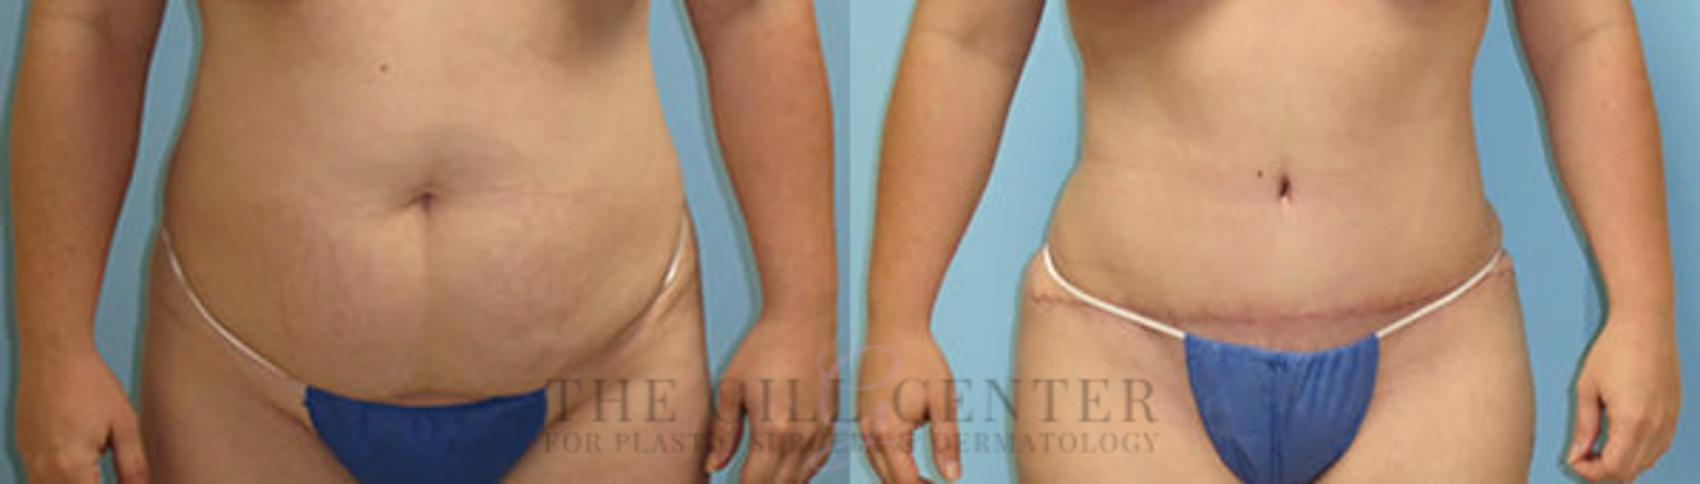 Tummy Tuck Case 231 Before & After Front | The Woodlands, TX | The Gill Center for Plastic Surgery and Dermatology